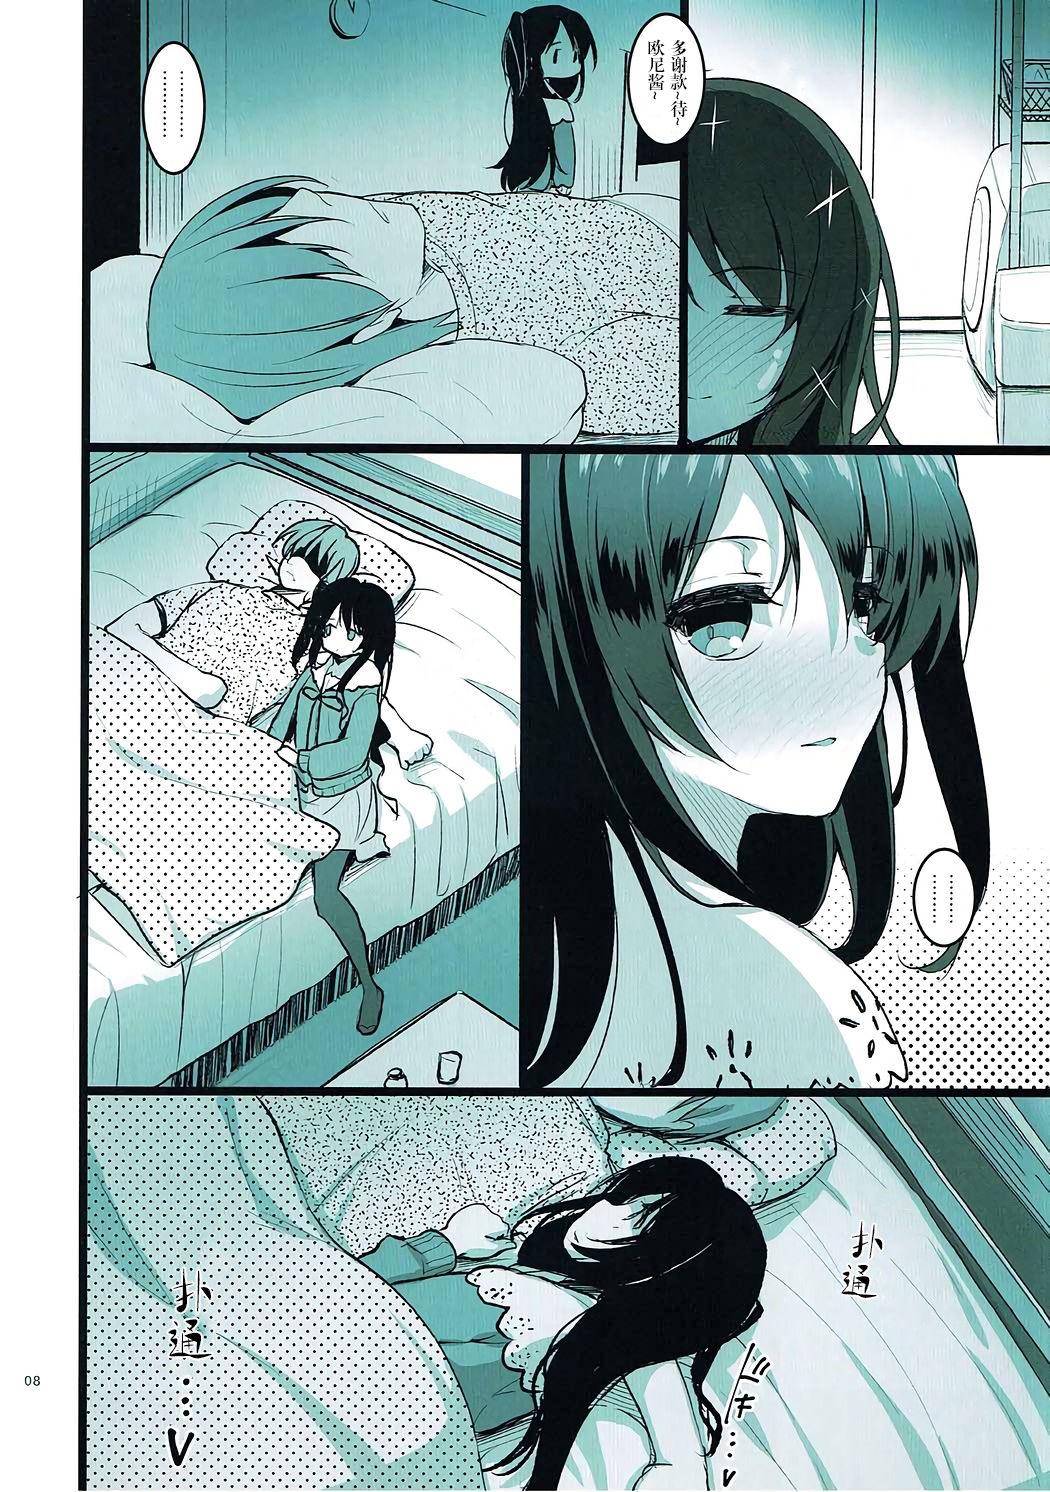 Lesbians IVY - Tokyo 7th sisters Hugecock - Page 7